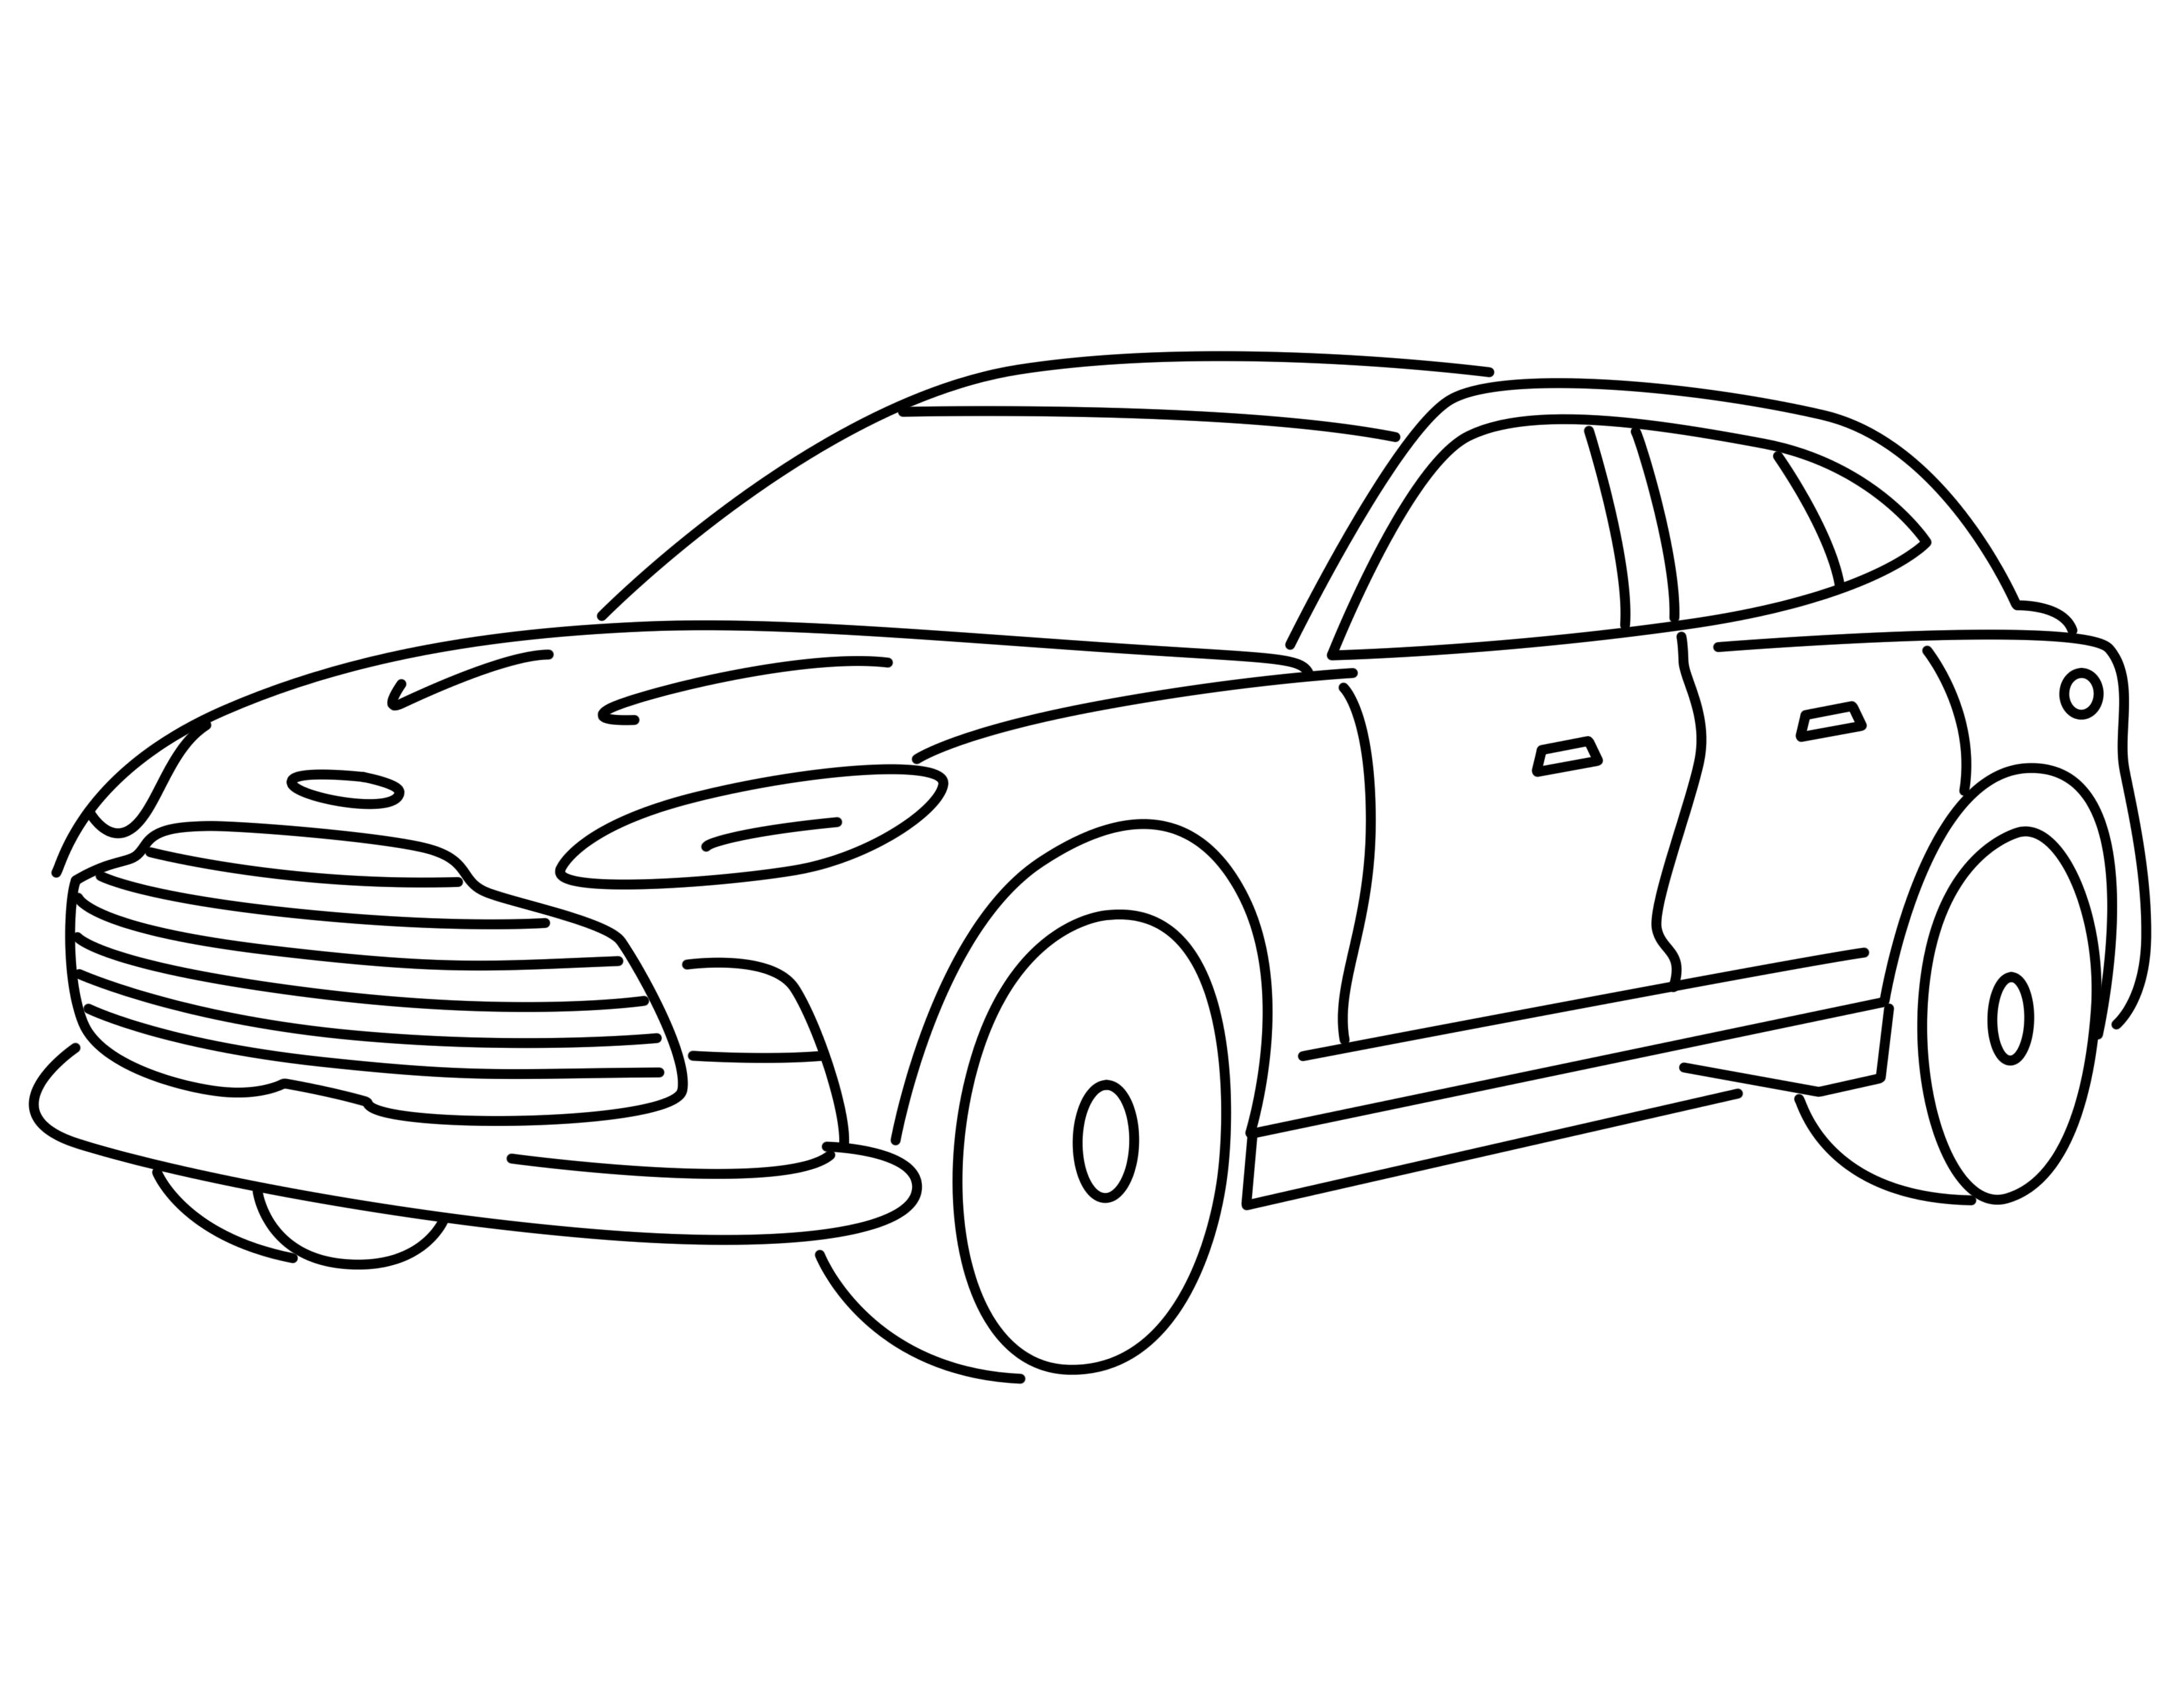 Aston Martin DBX coloring page